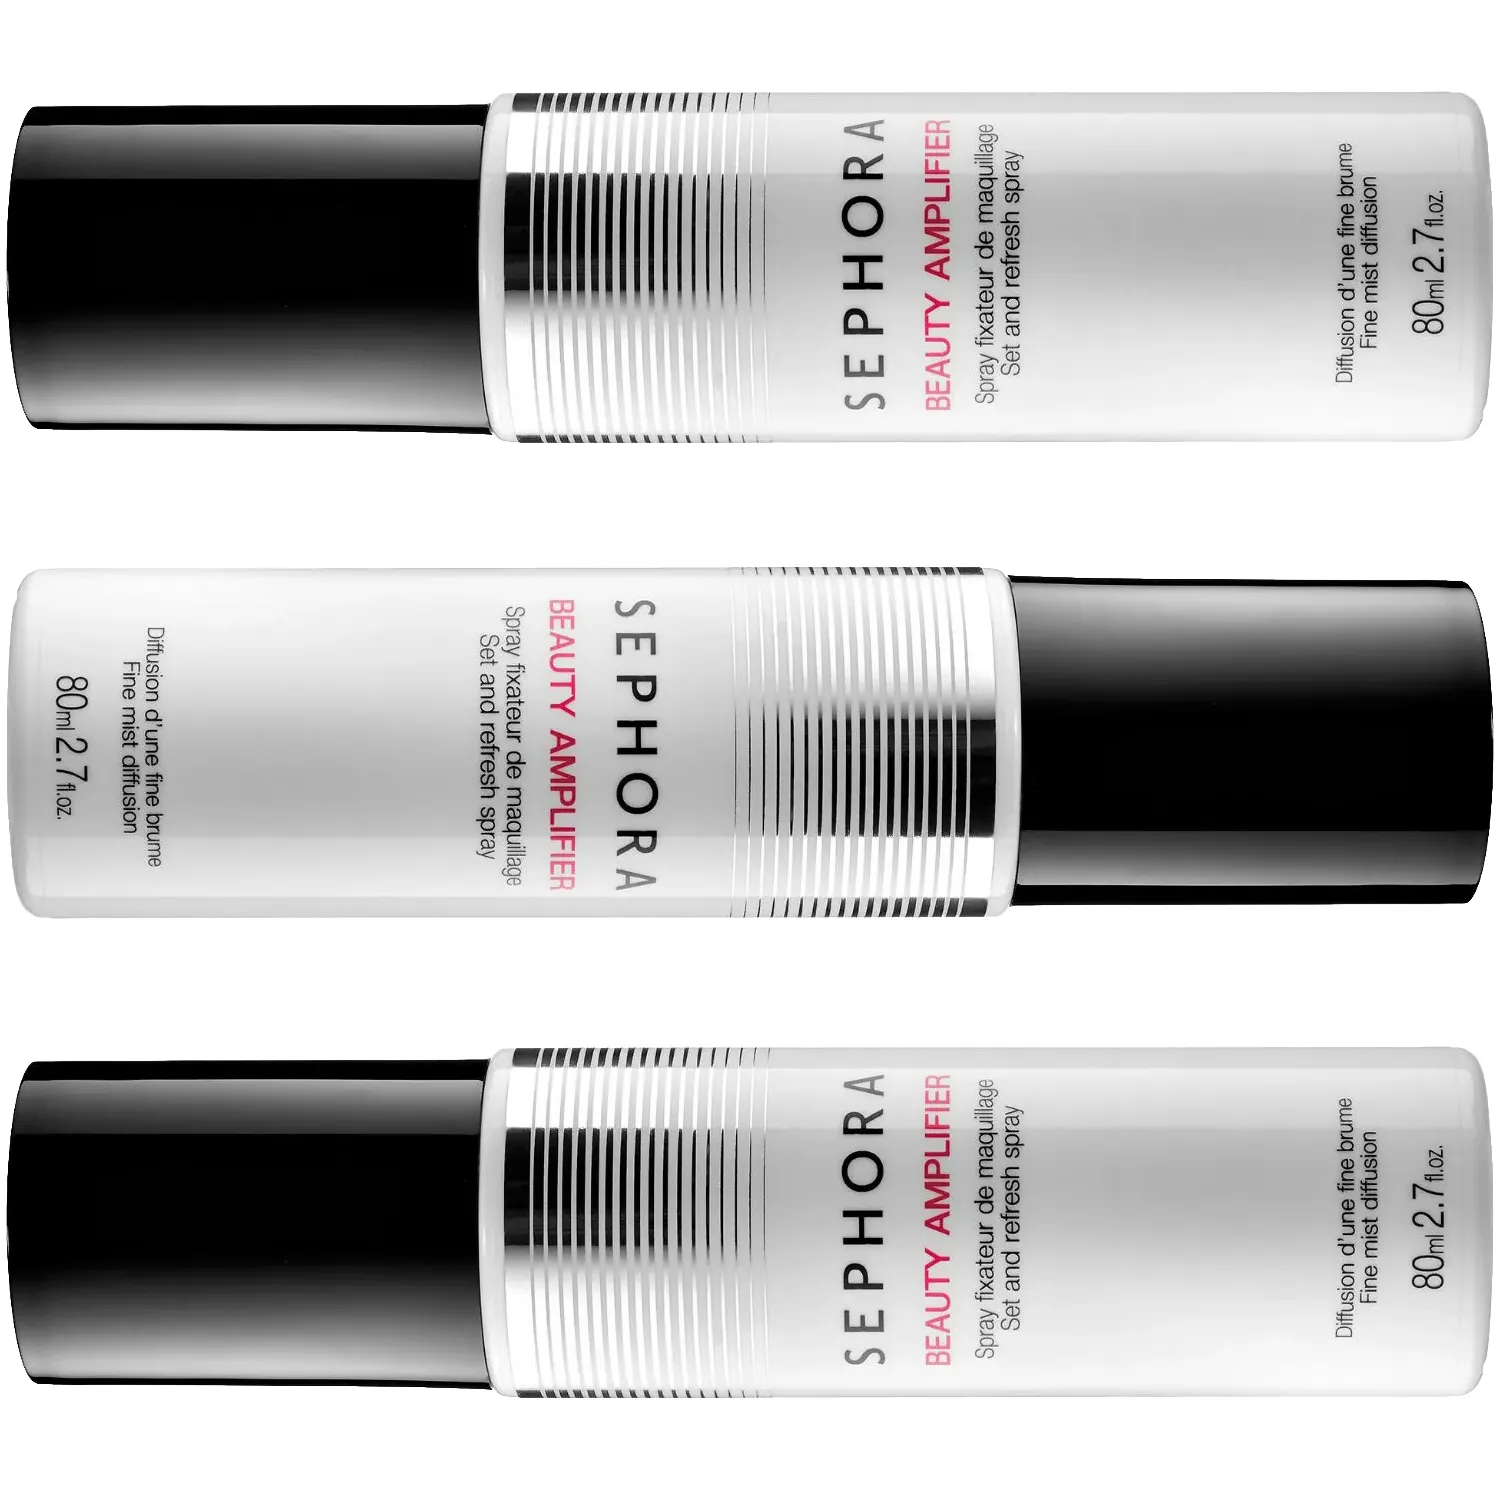 Free Sephora Beauty Product Samples